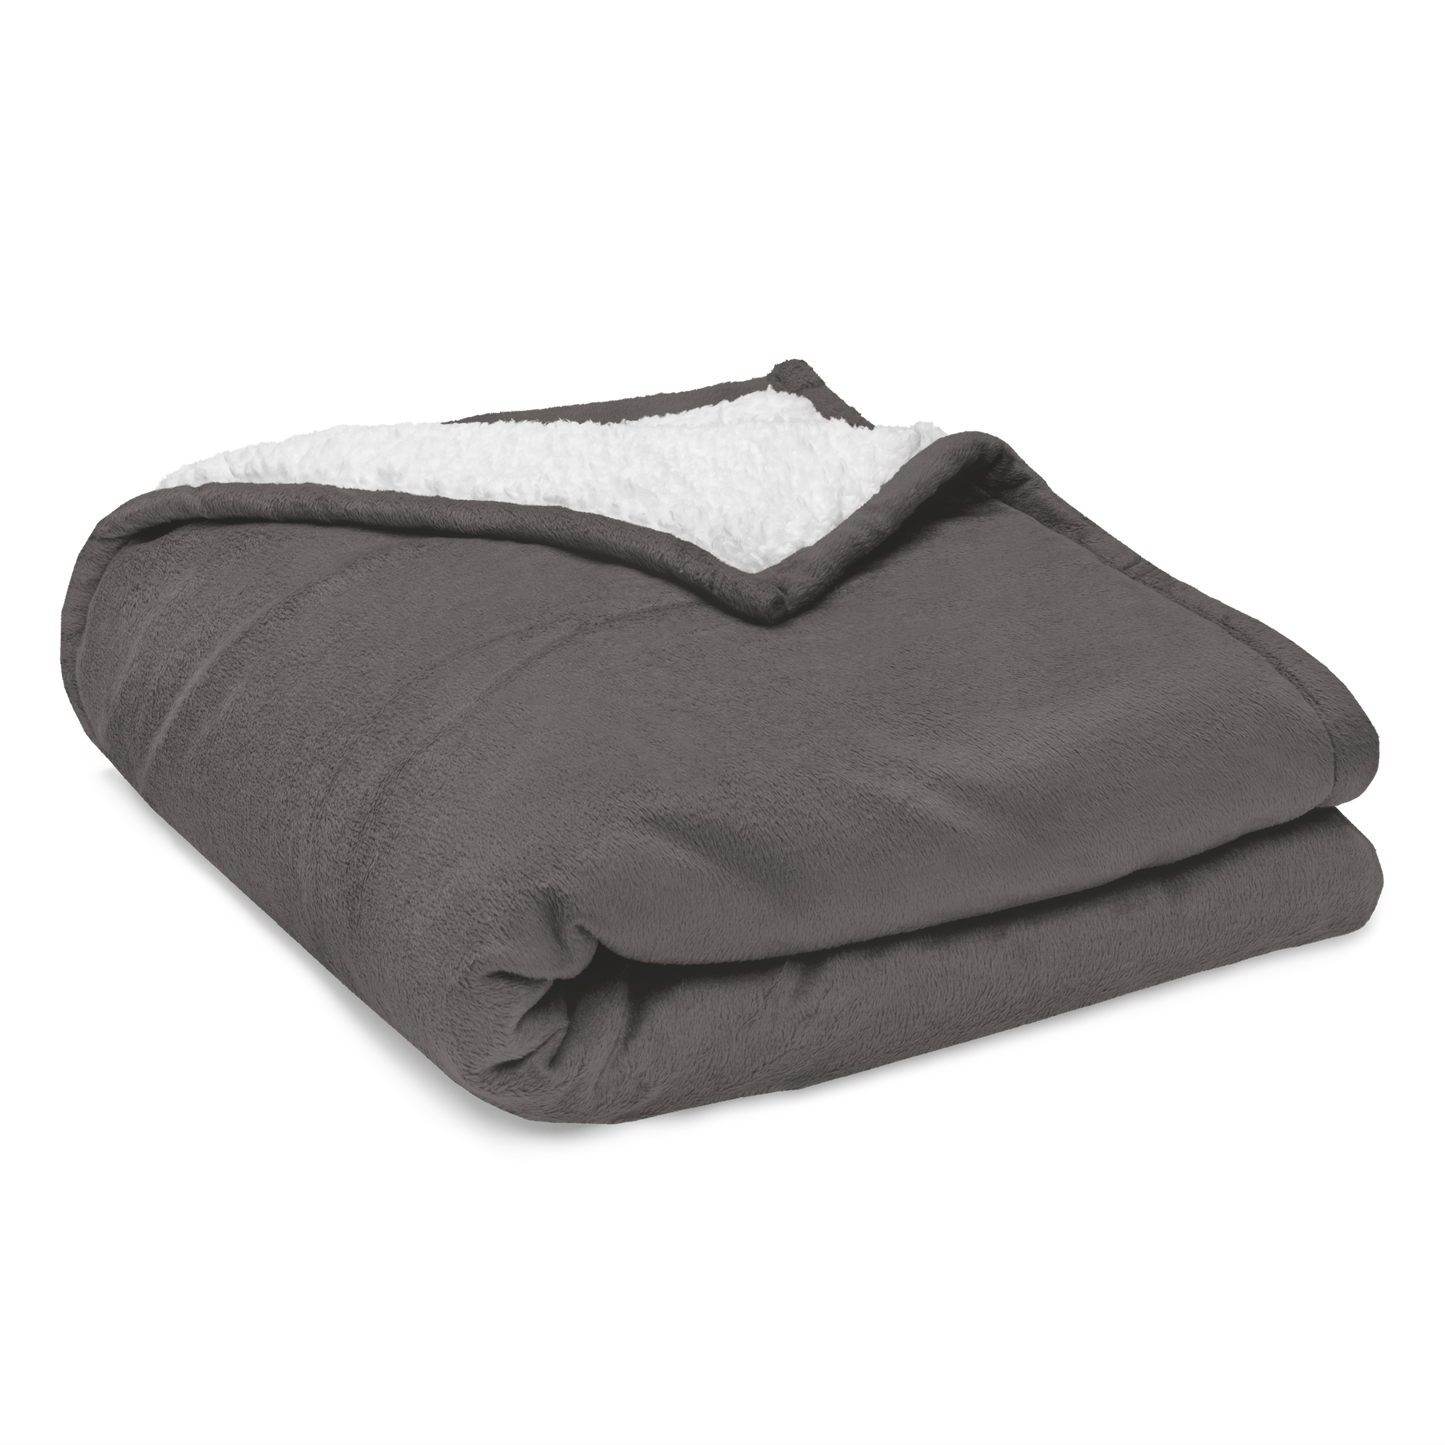 YHM Designs - YLW Kelowna Premium Sherpa Blanket - Crossed-X Design with Airport Code and Vintage Propliner - White Embroidery - Image 11